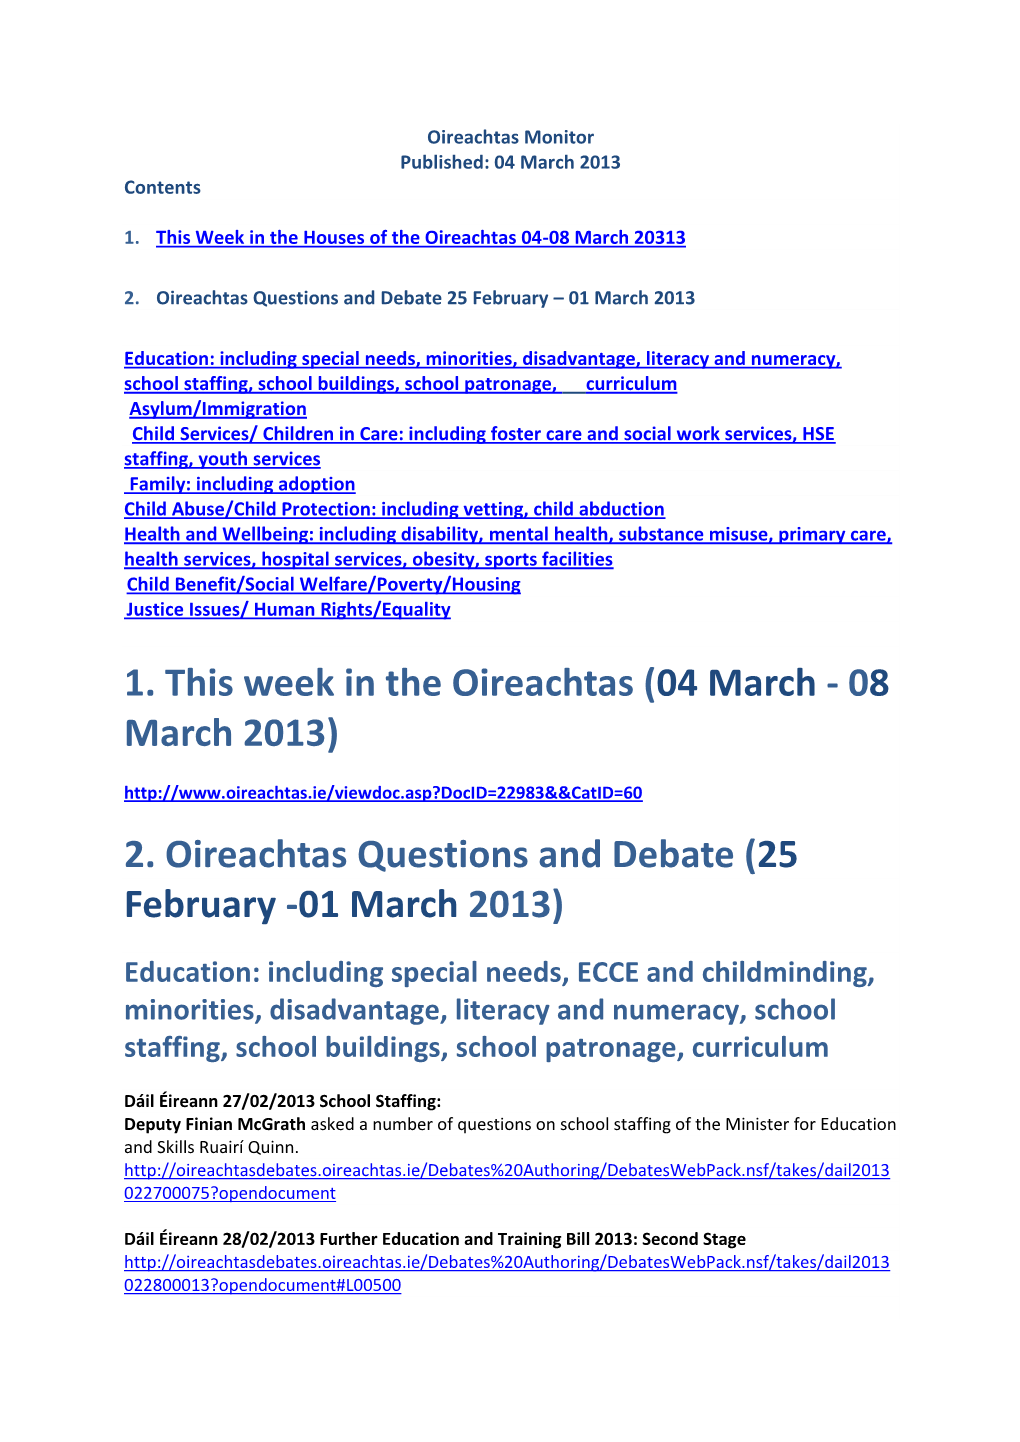 2. Oireachtas Questions and Debate (25 February -01 March 2013)